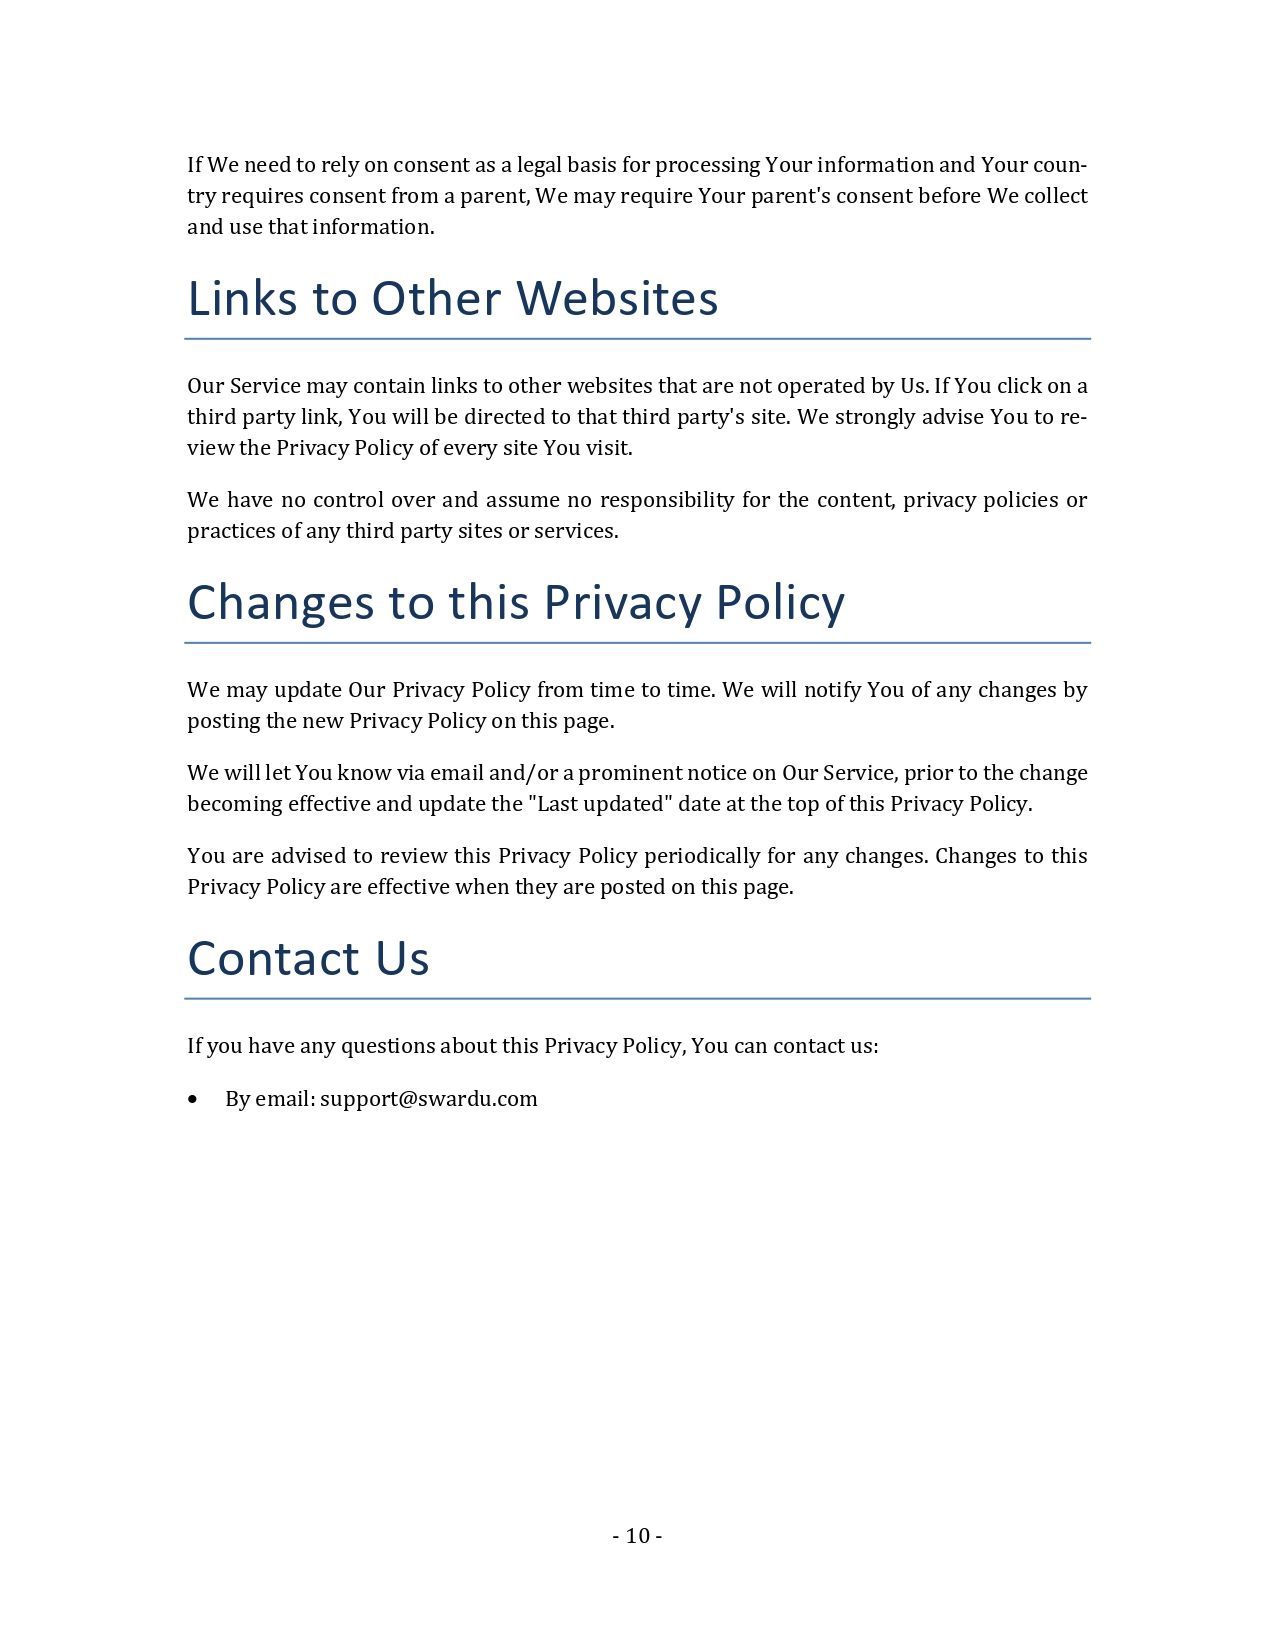 Luvabuzza Privacy Policy_2_page-0010